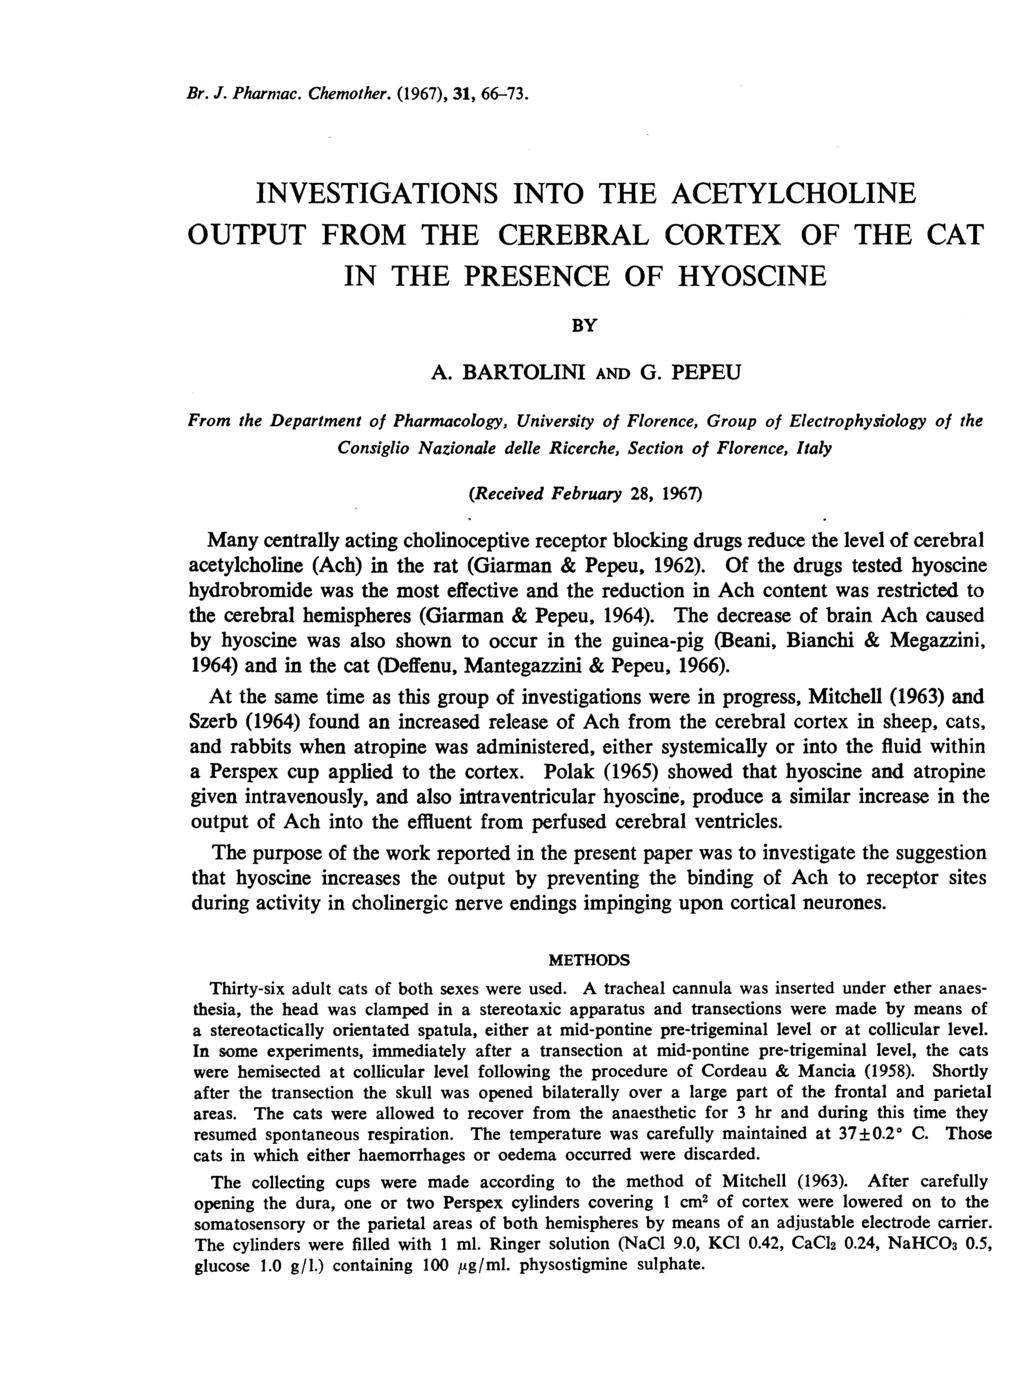 Br. J. Pharmac. Chemother. (1967), 31, 66-73. INVESTIGATIONS INTO THE ACETYLCHOLINE OUTPUT FROM THE CEREBRAL CORTEX OF THE CAT IN THE PRESENCE OF HYOSCINE BY A. BARTOLINI AND G.